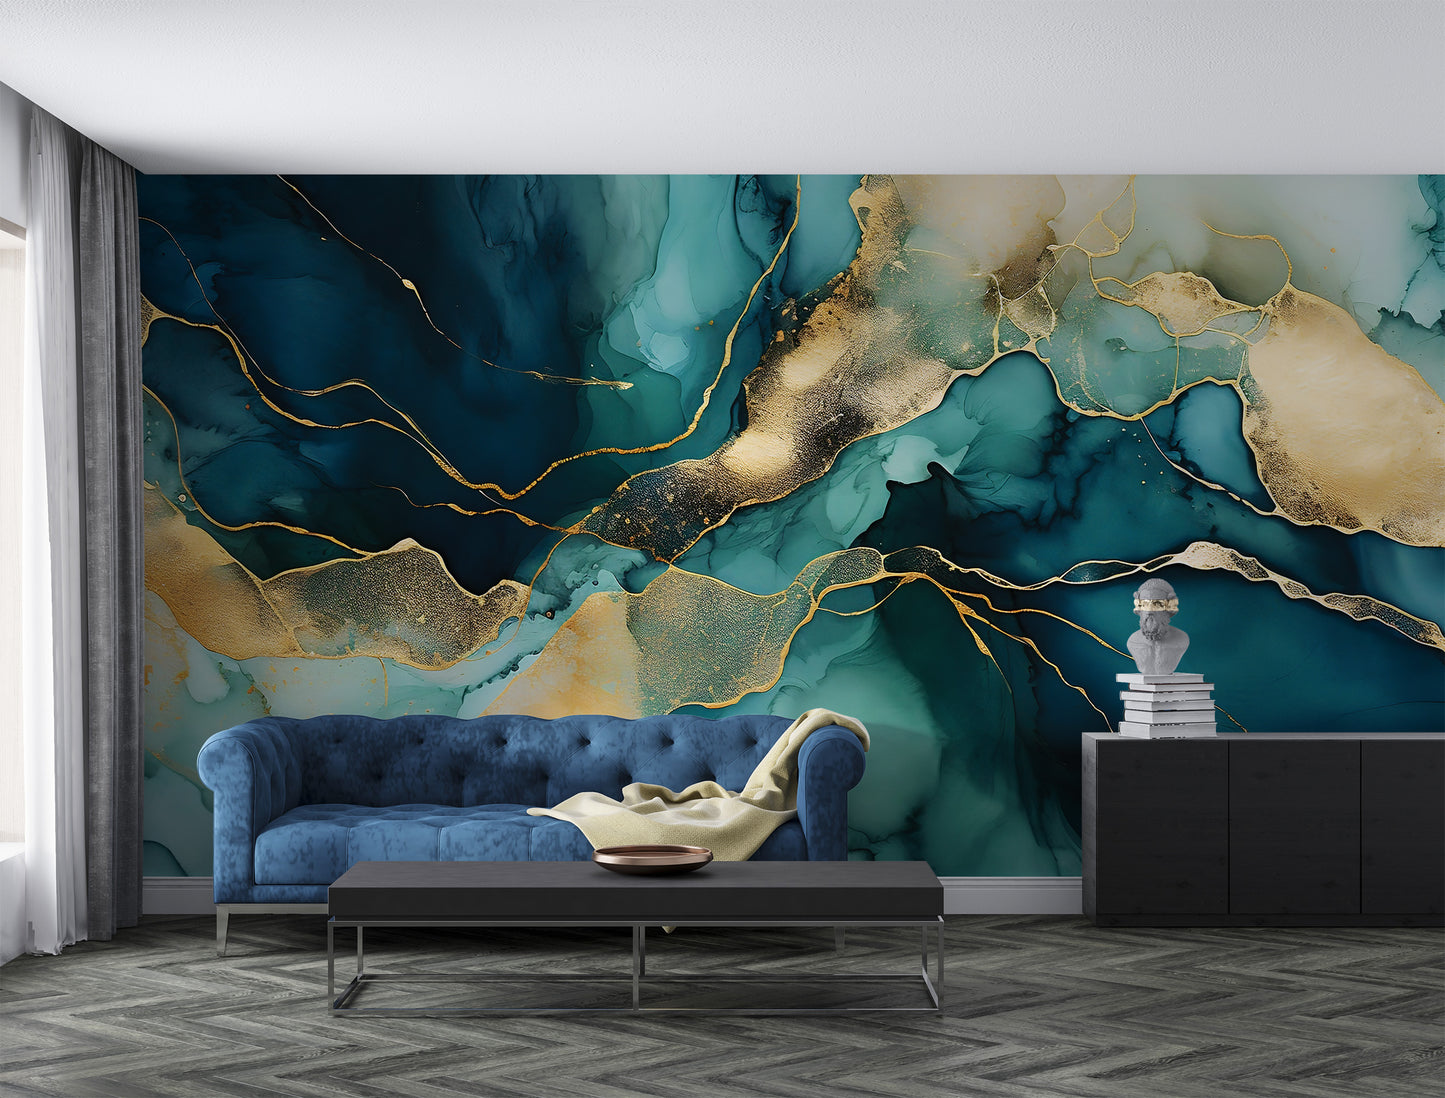 Abstract Watercolor Mural - Versatile and Stylish